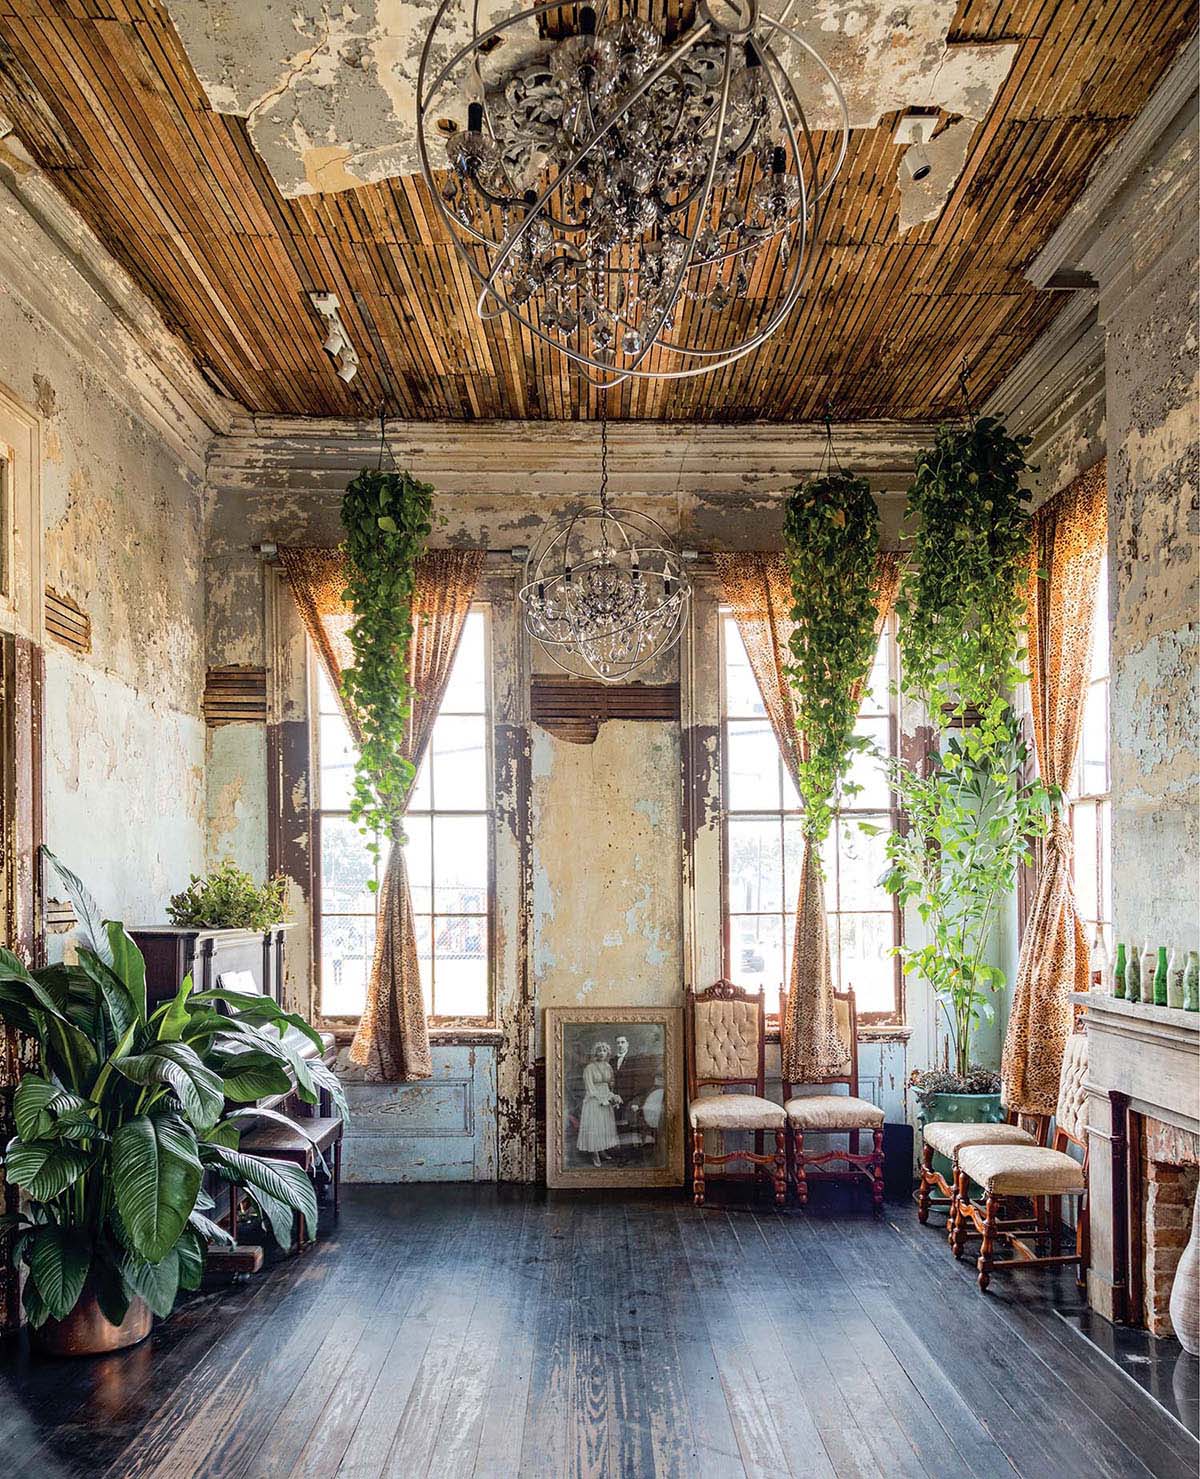 Vines hang alongside curtains in a weathered room.